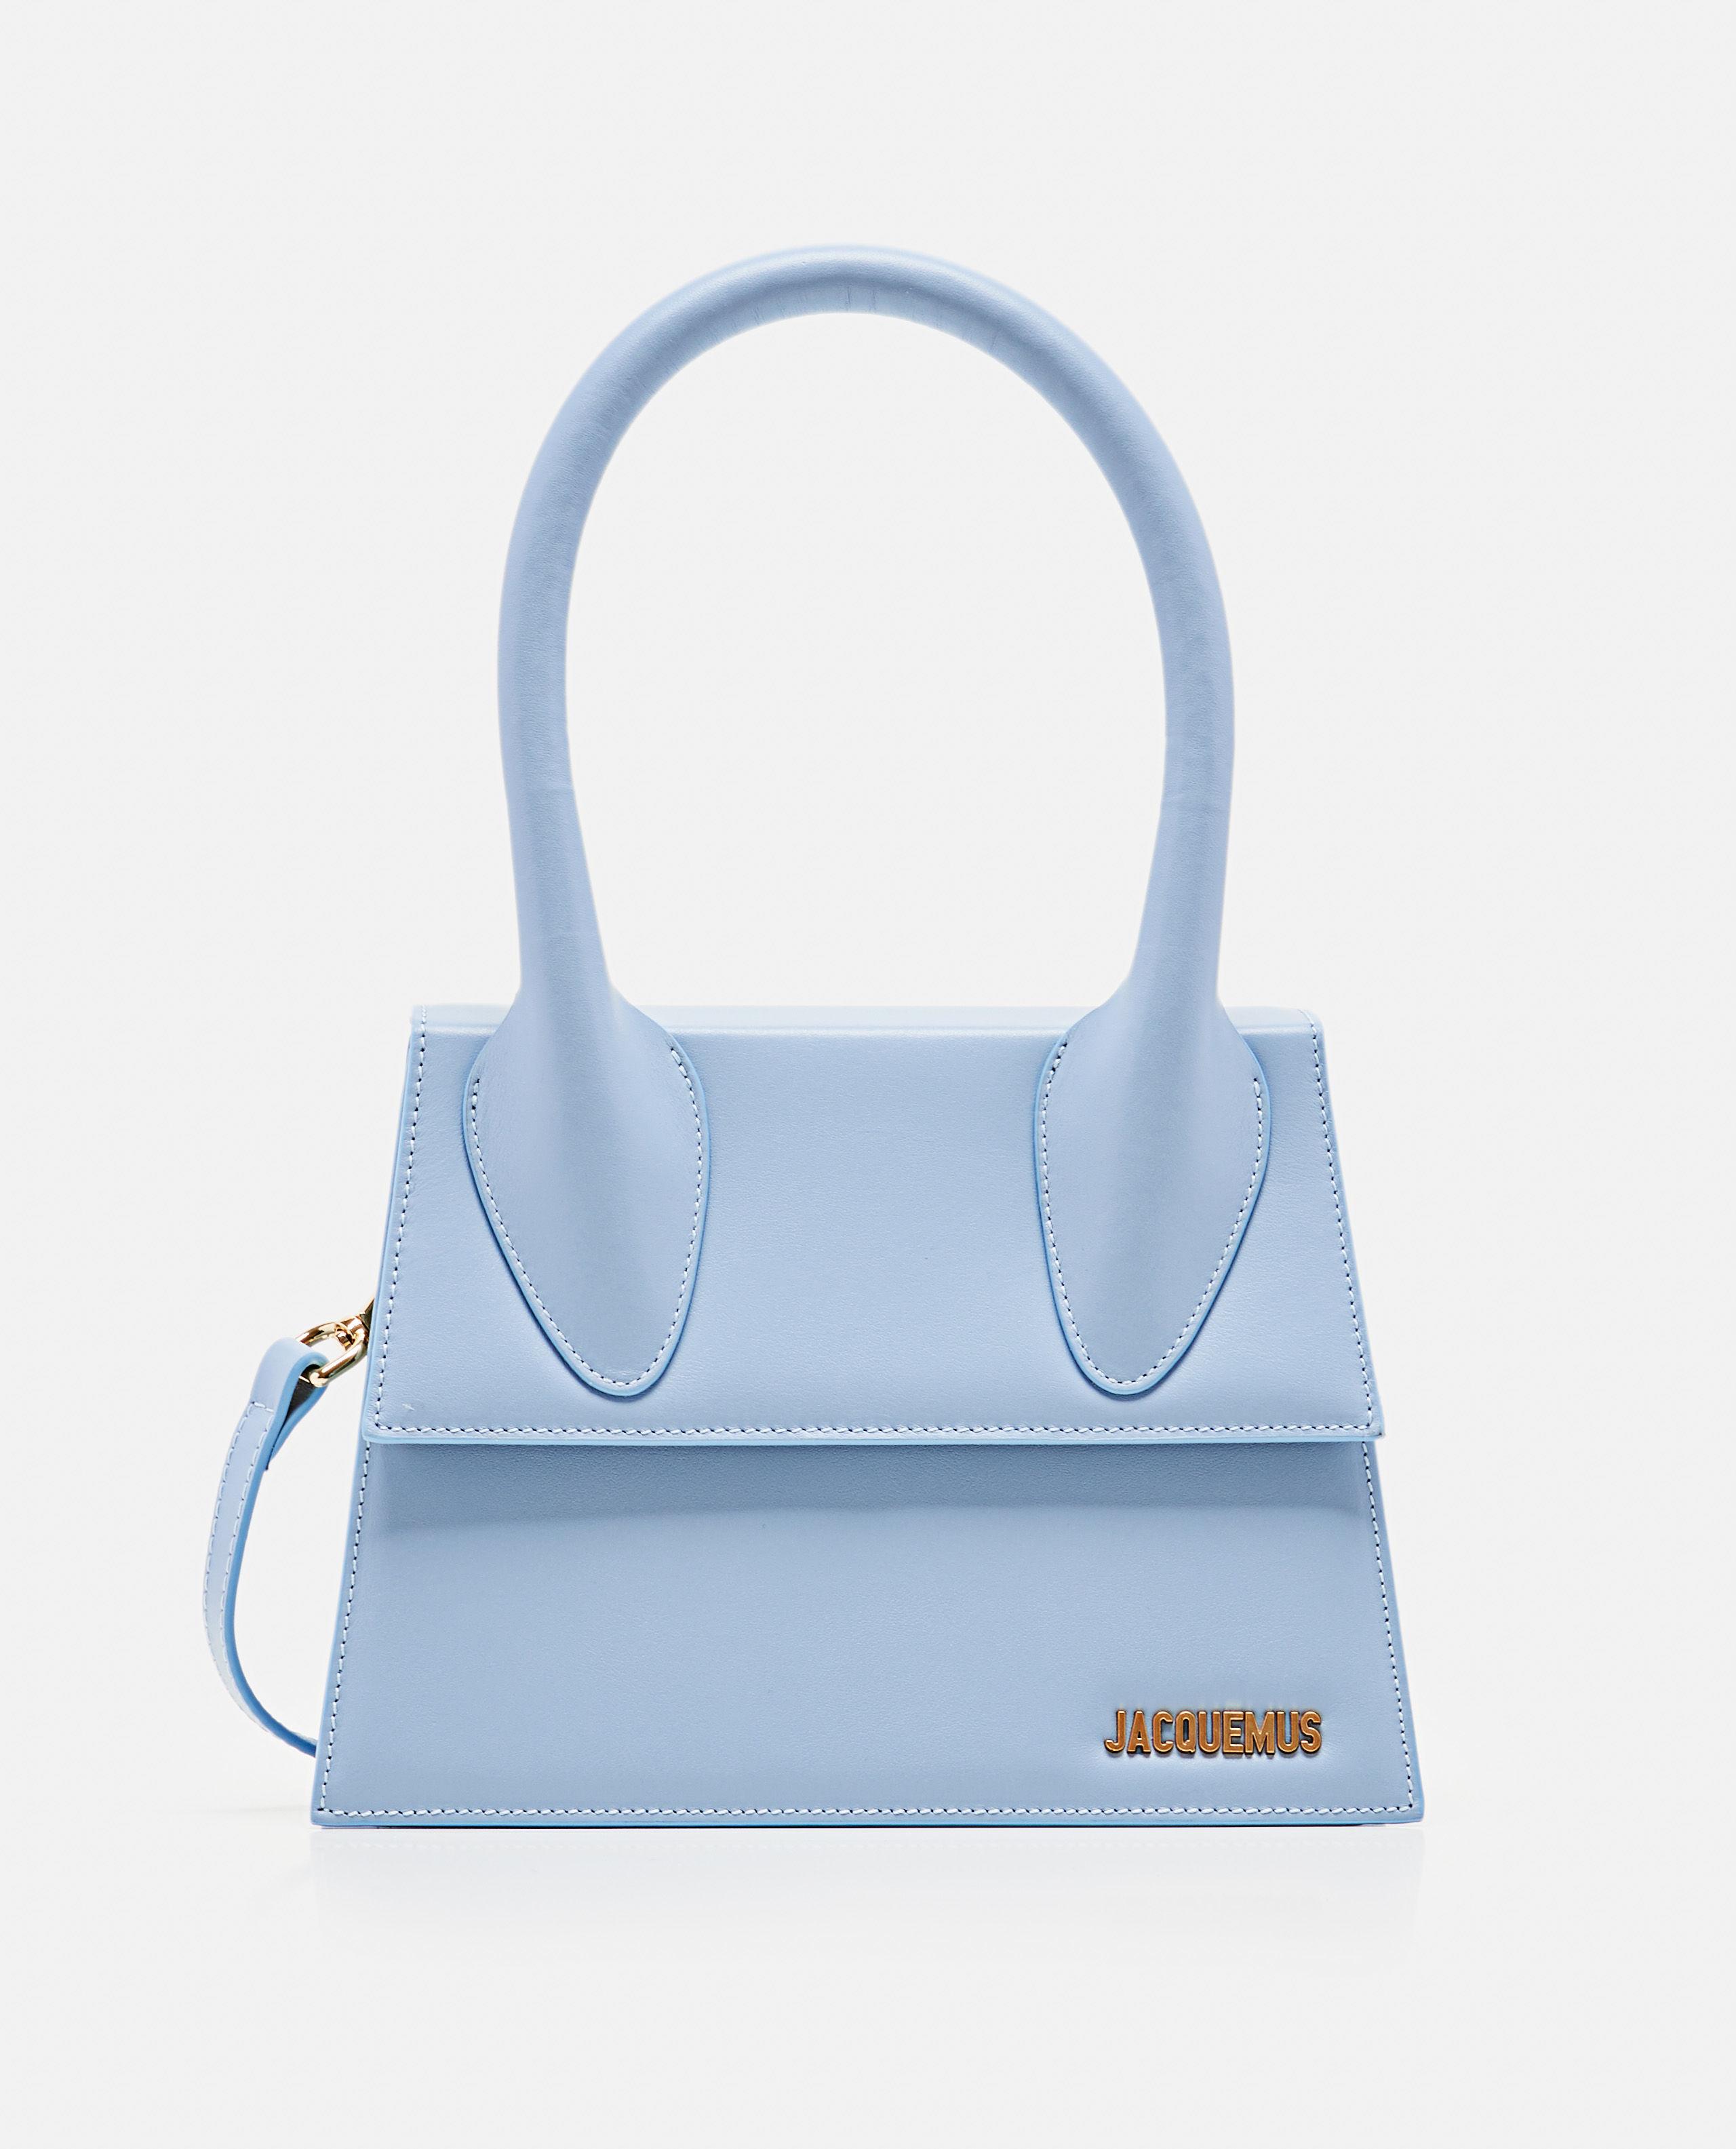 Jacquemus Le Grand Chiquito Bag in Blue - Lyst